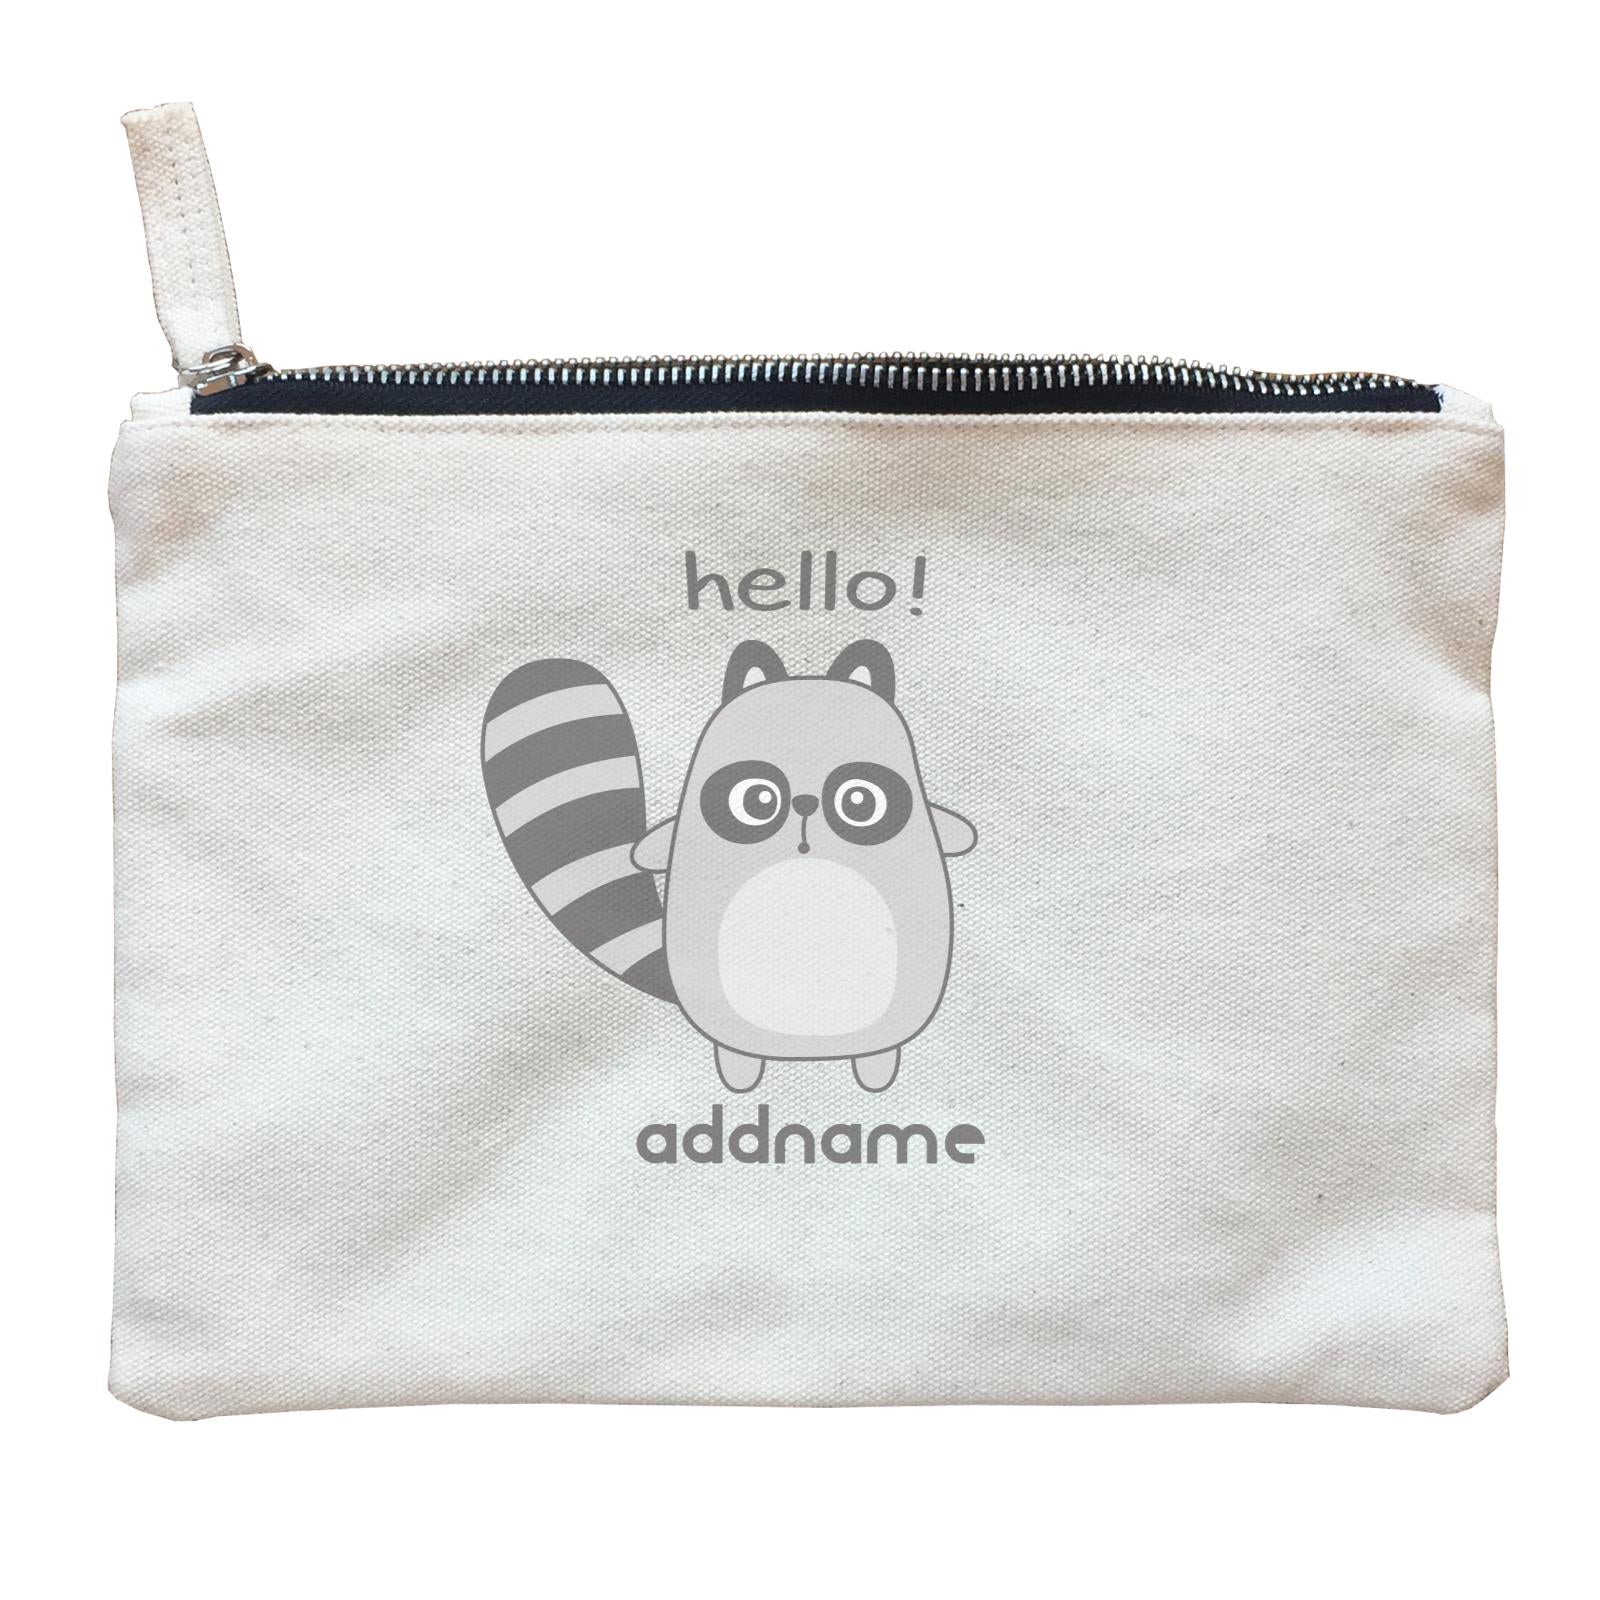 Cool Cute Animals Racoon Hello Addname Zipper Pouch